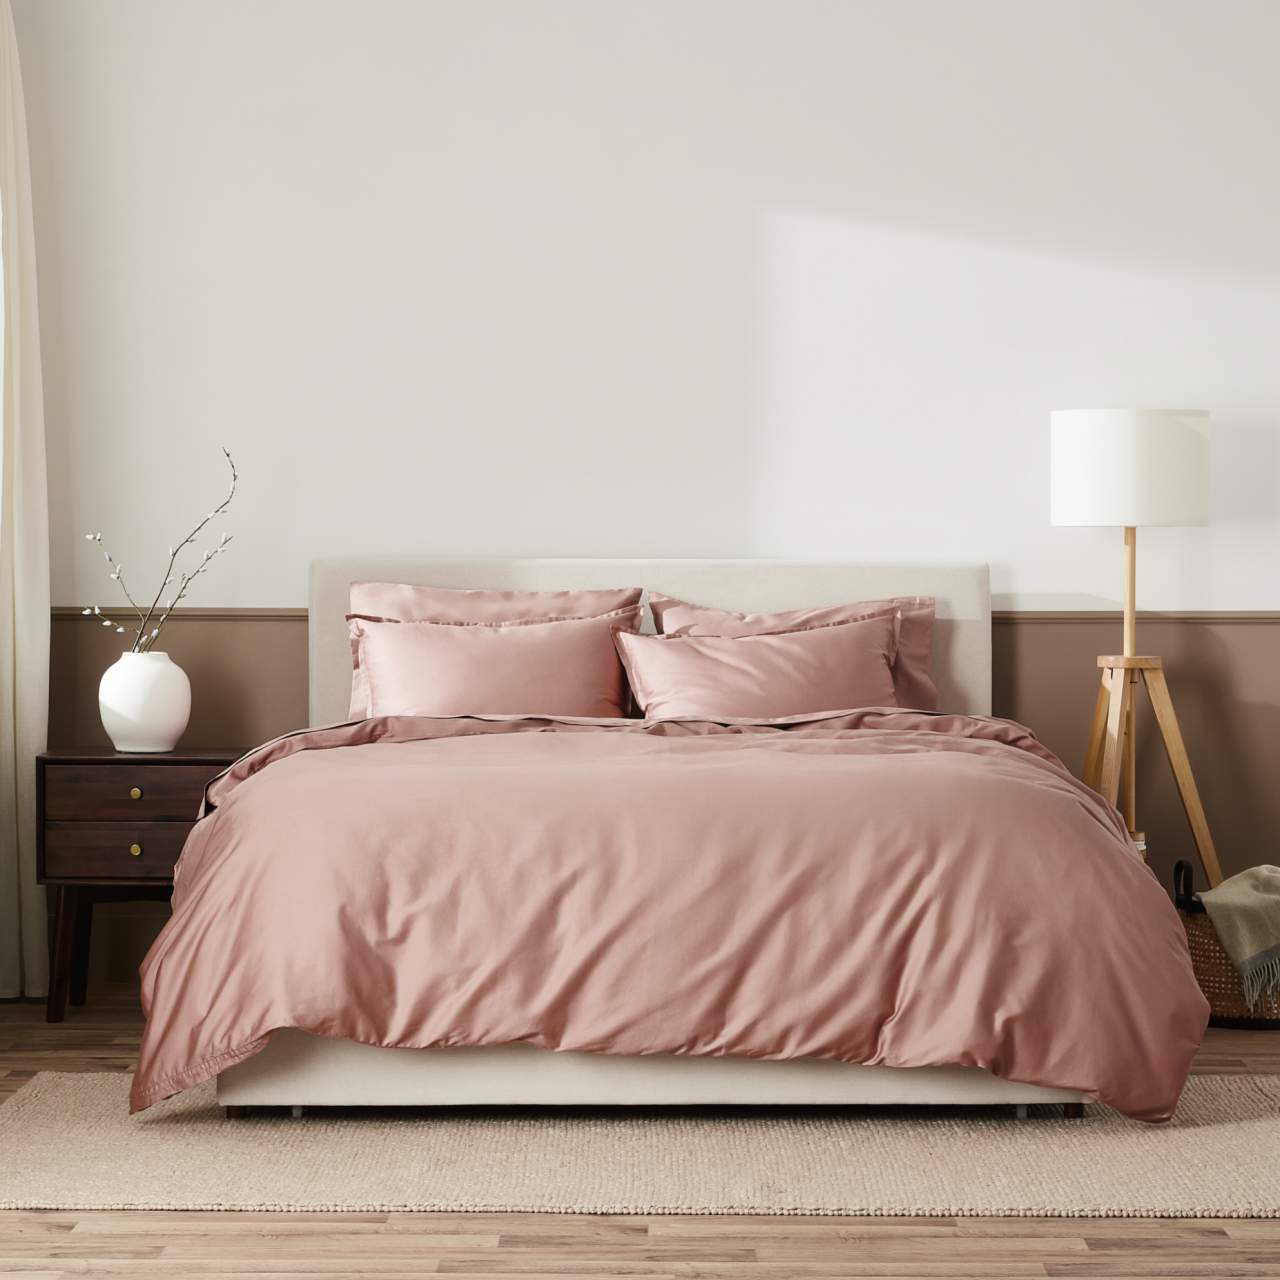 Egyptian Cotton Bed Sheets Image 3